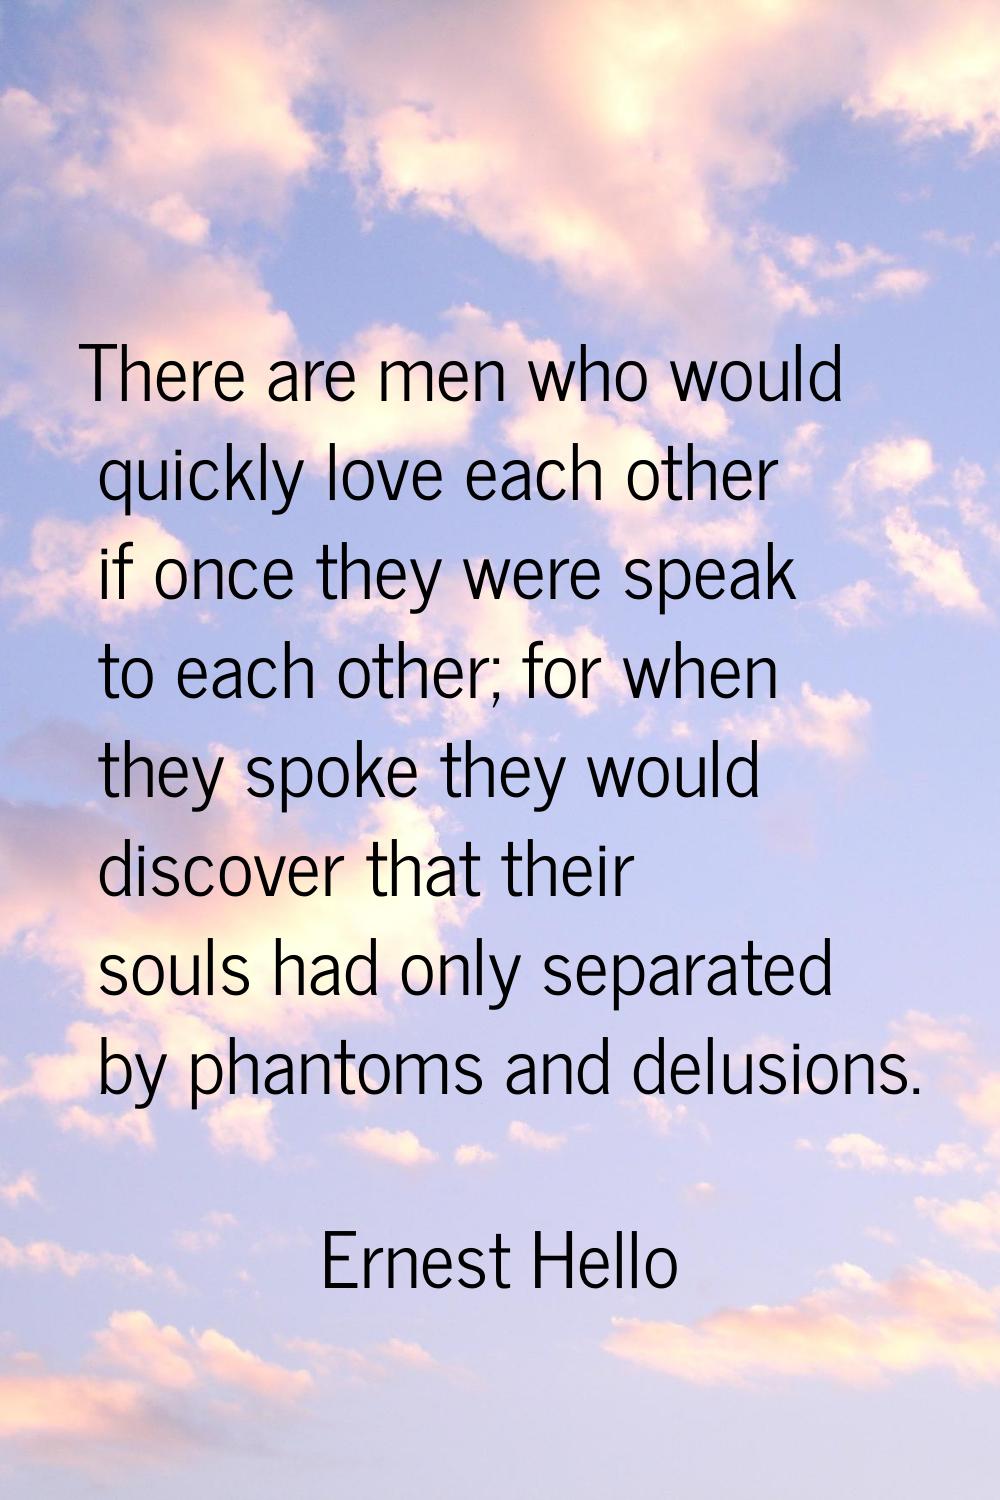 There are men who would quickly love each other if once they were speak to each other; for when the